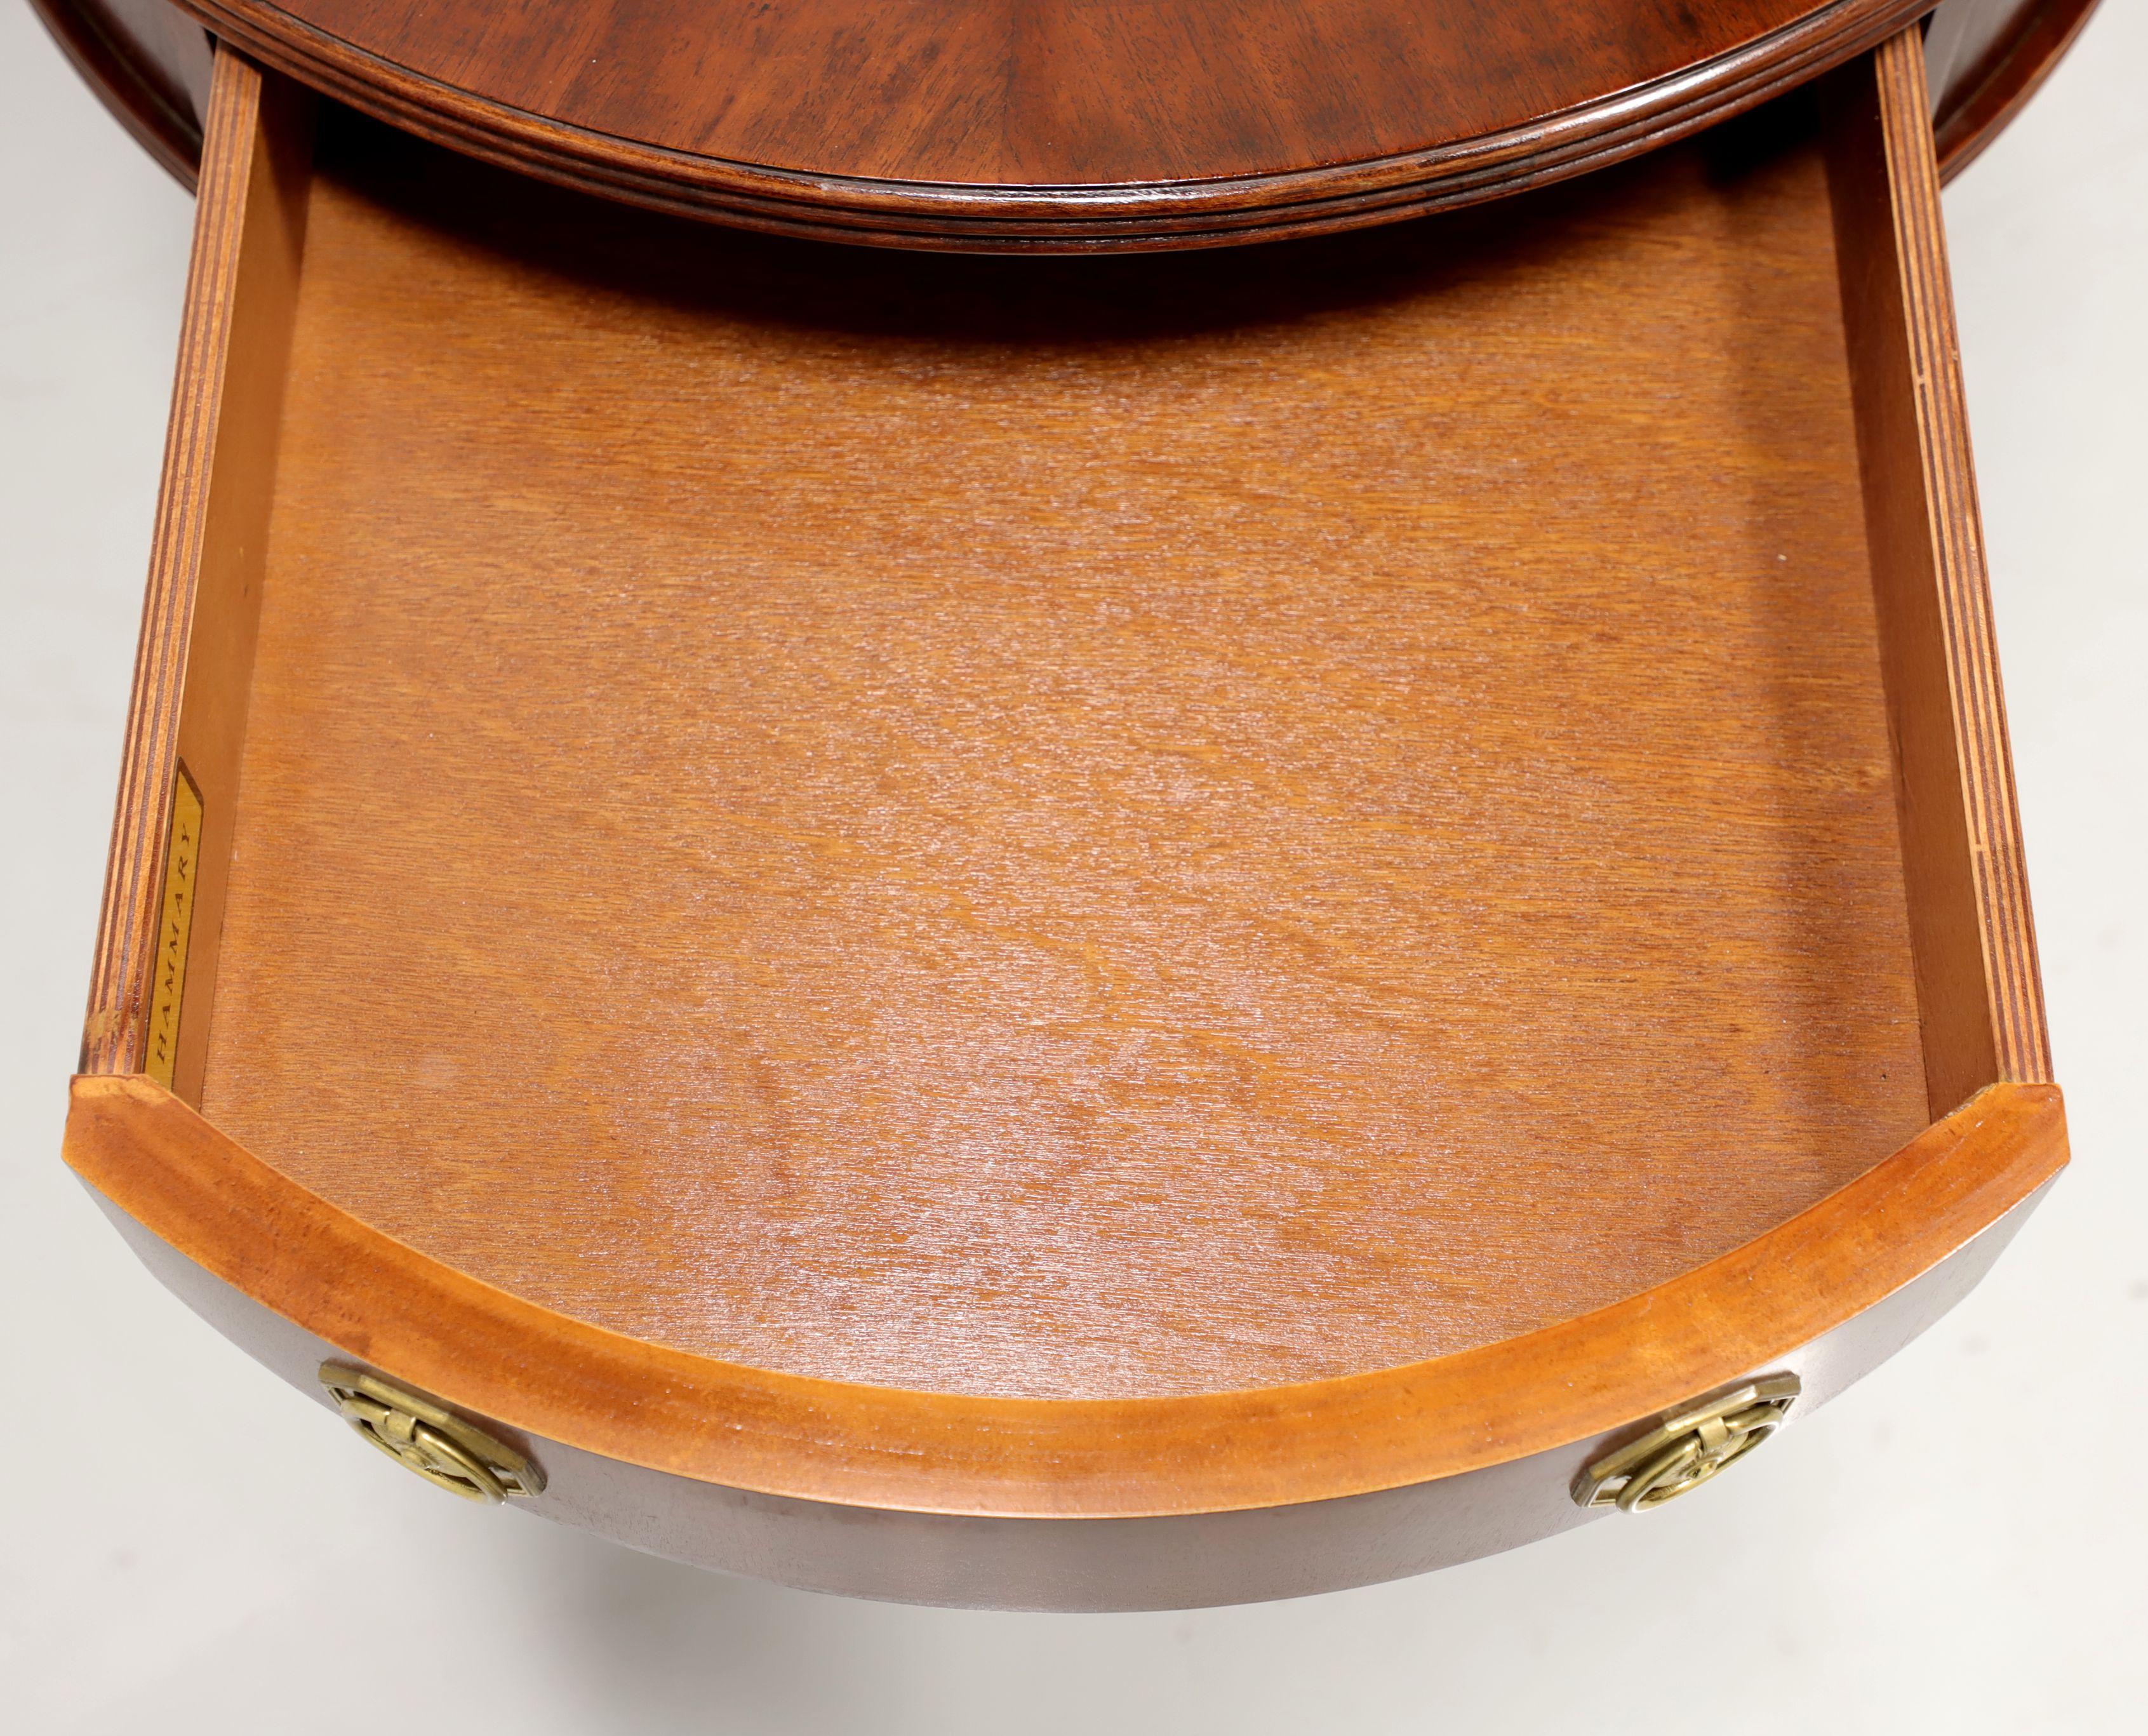 Brass HAMMARY Banded Inlaid Mahogany Round Drum Table with Pedestal Base